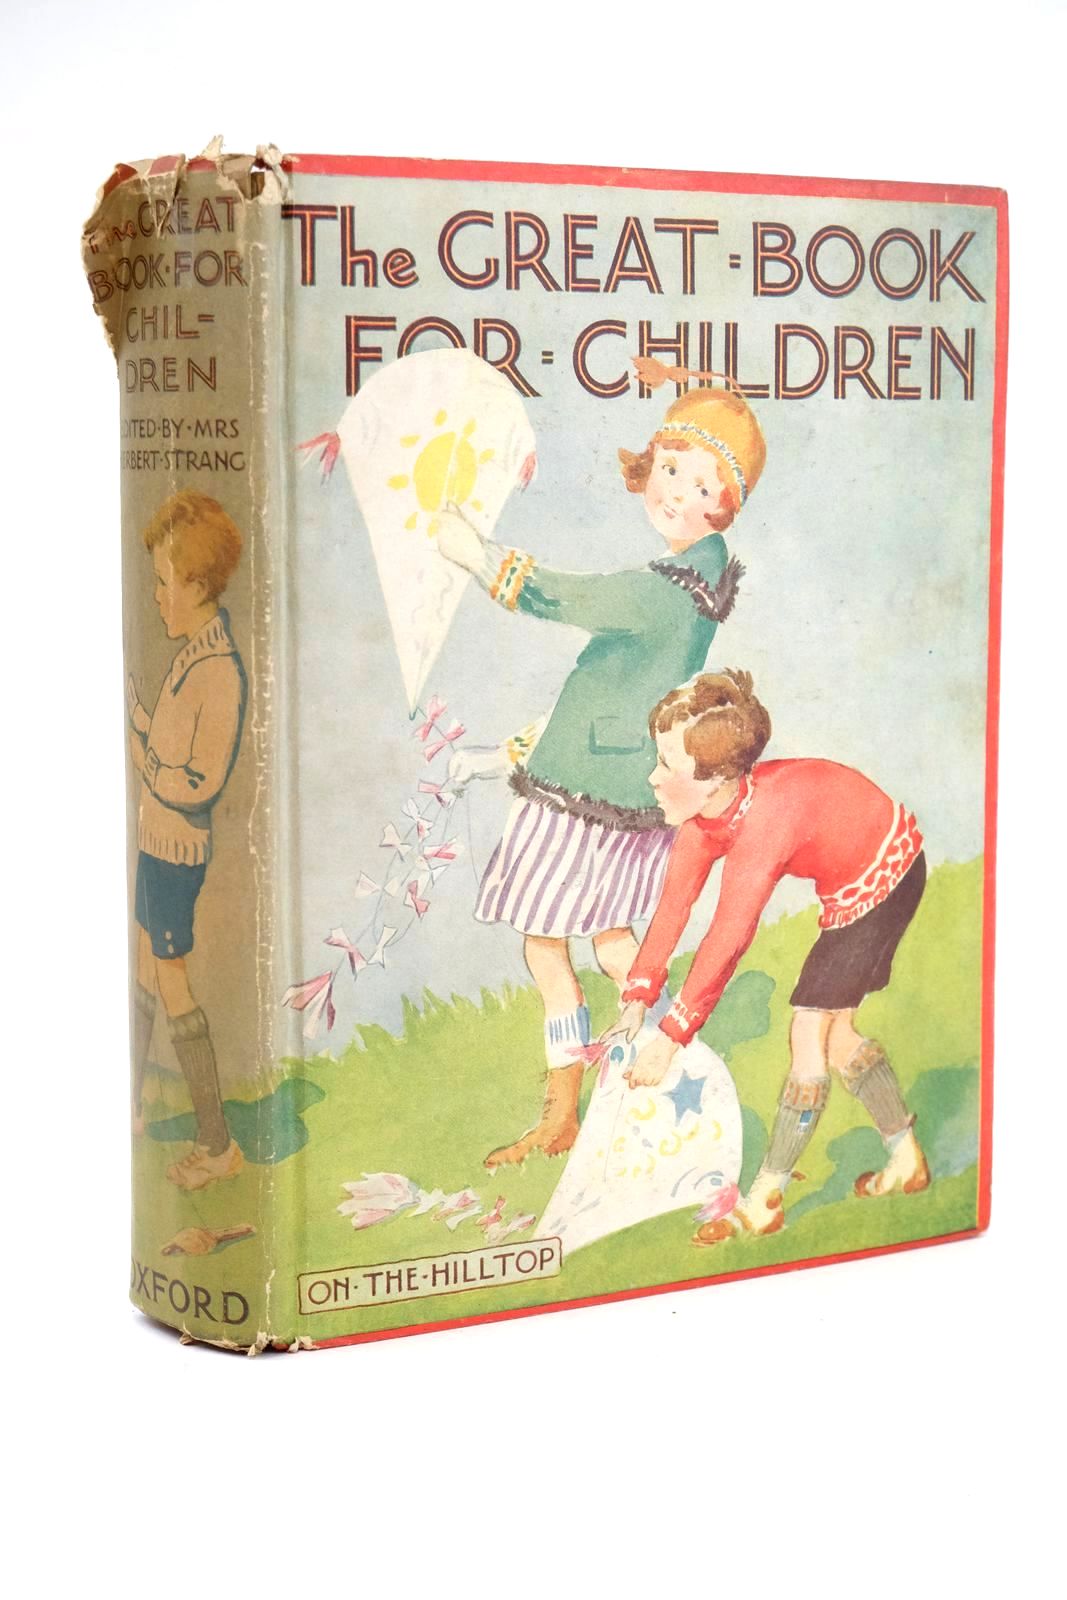 Photo of THE GREAT BOOK FOR CHILDREN written by Strang, Mrs. Herbert illustrated by Govey, Lilian A. Anderson, Anne Wright, Alan et al., published by Oxford University Press, Humphrey Milford (STOCK CODE: 1324752)  for sale by Stella & Rose's Books